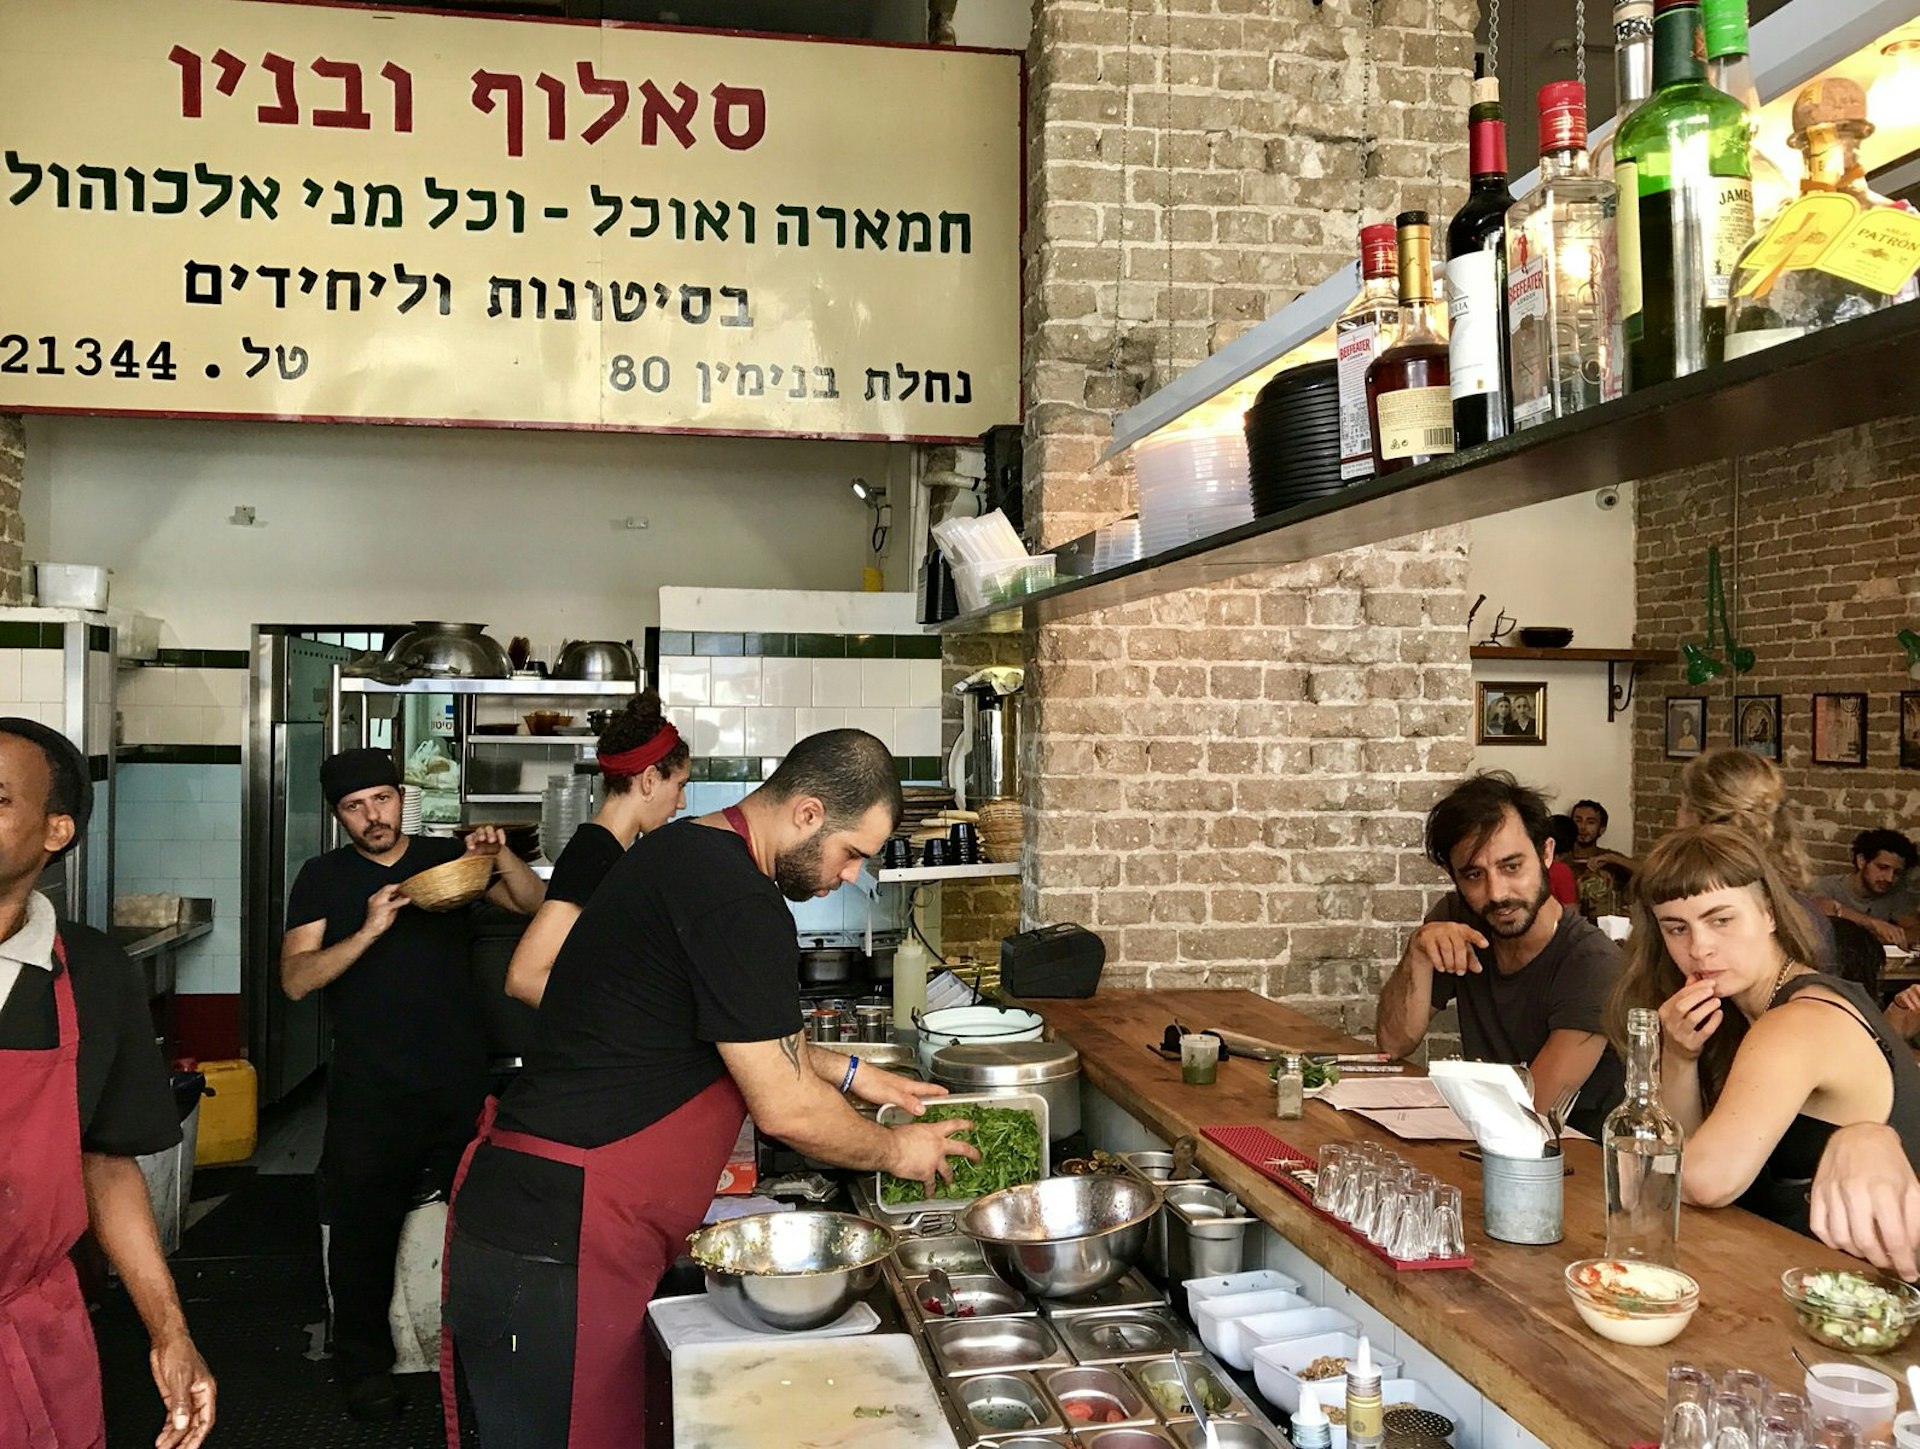 Saluf and Sons in Tel Aviv. Image by Shira Rubin / Lonely Planet